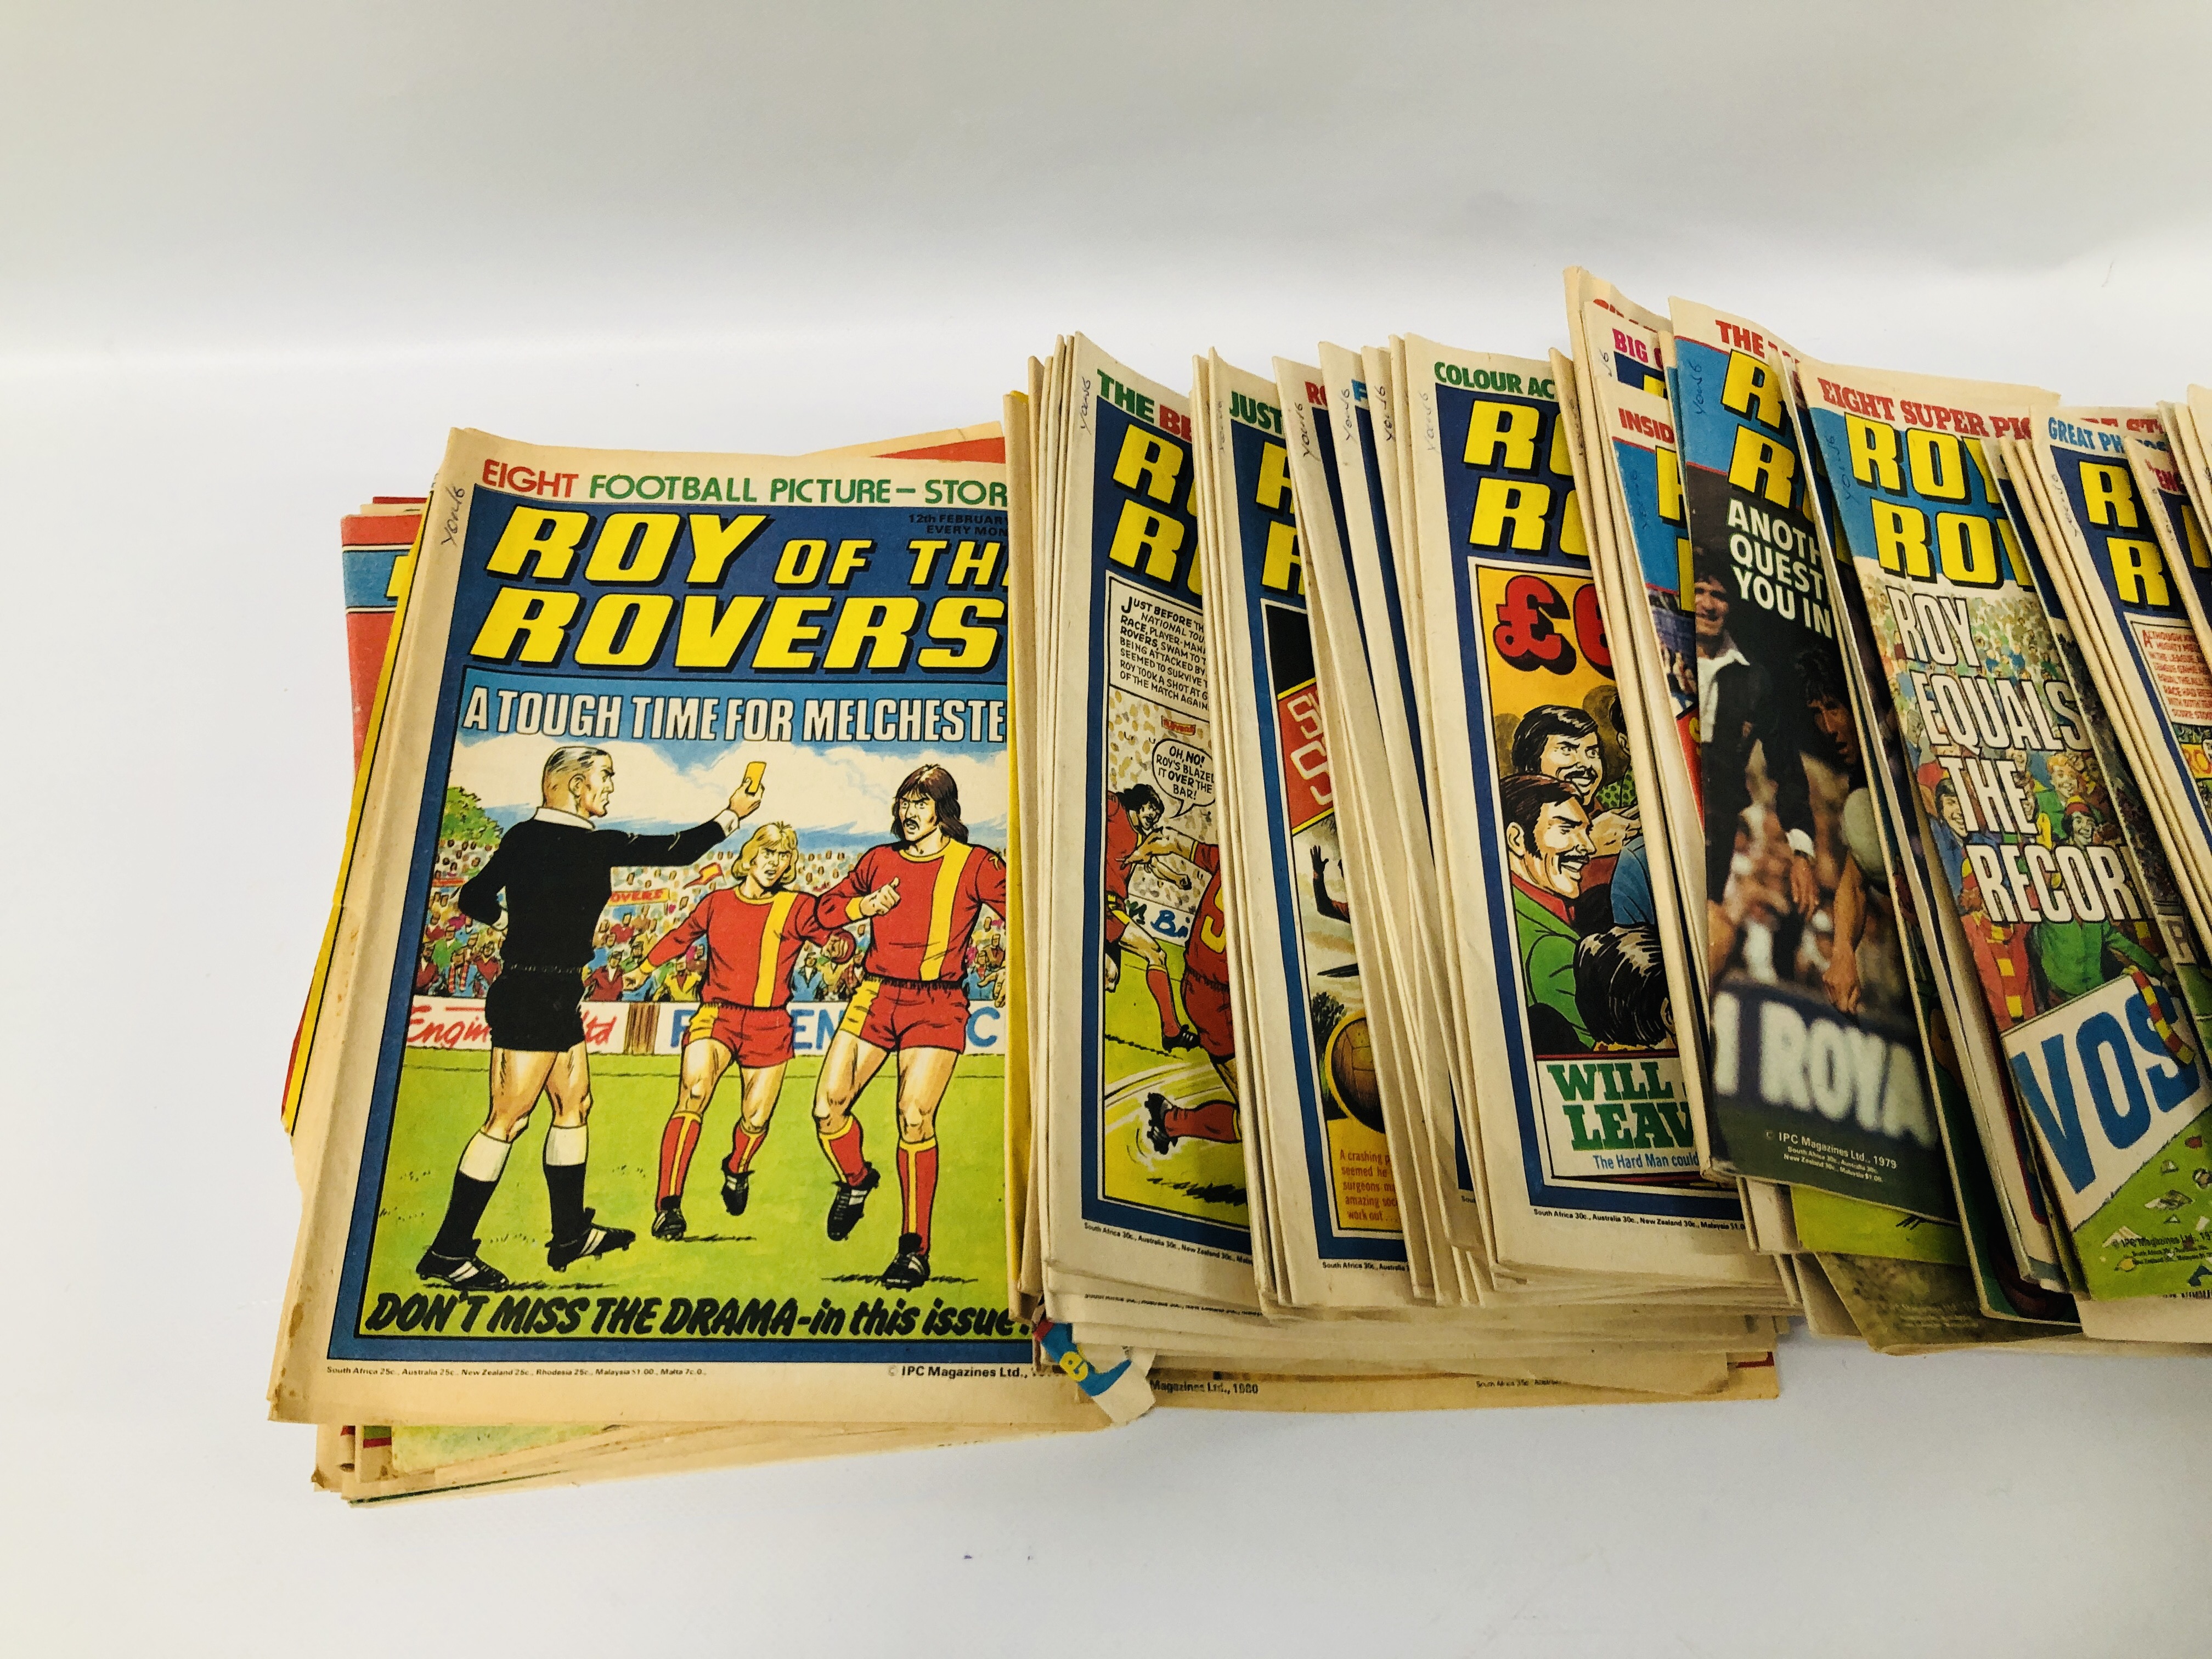 COLLECTION OF VINTAGE MAGAZINES TO INCLUDE MAINLY "ROY OF THE ROVERS" ETC. - Image 2 of 5